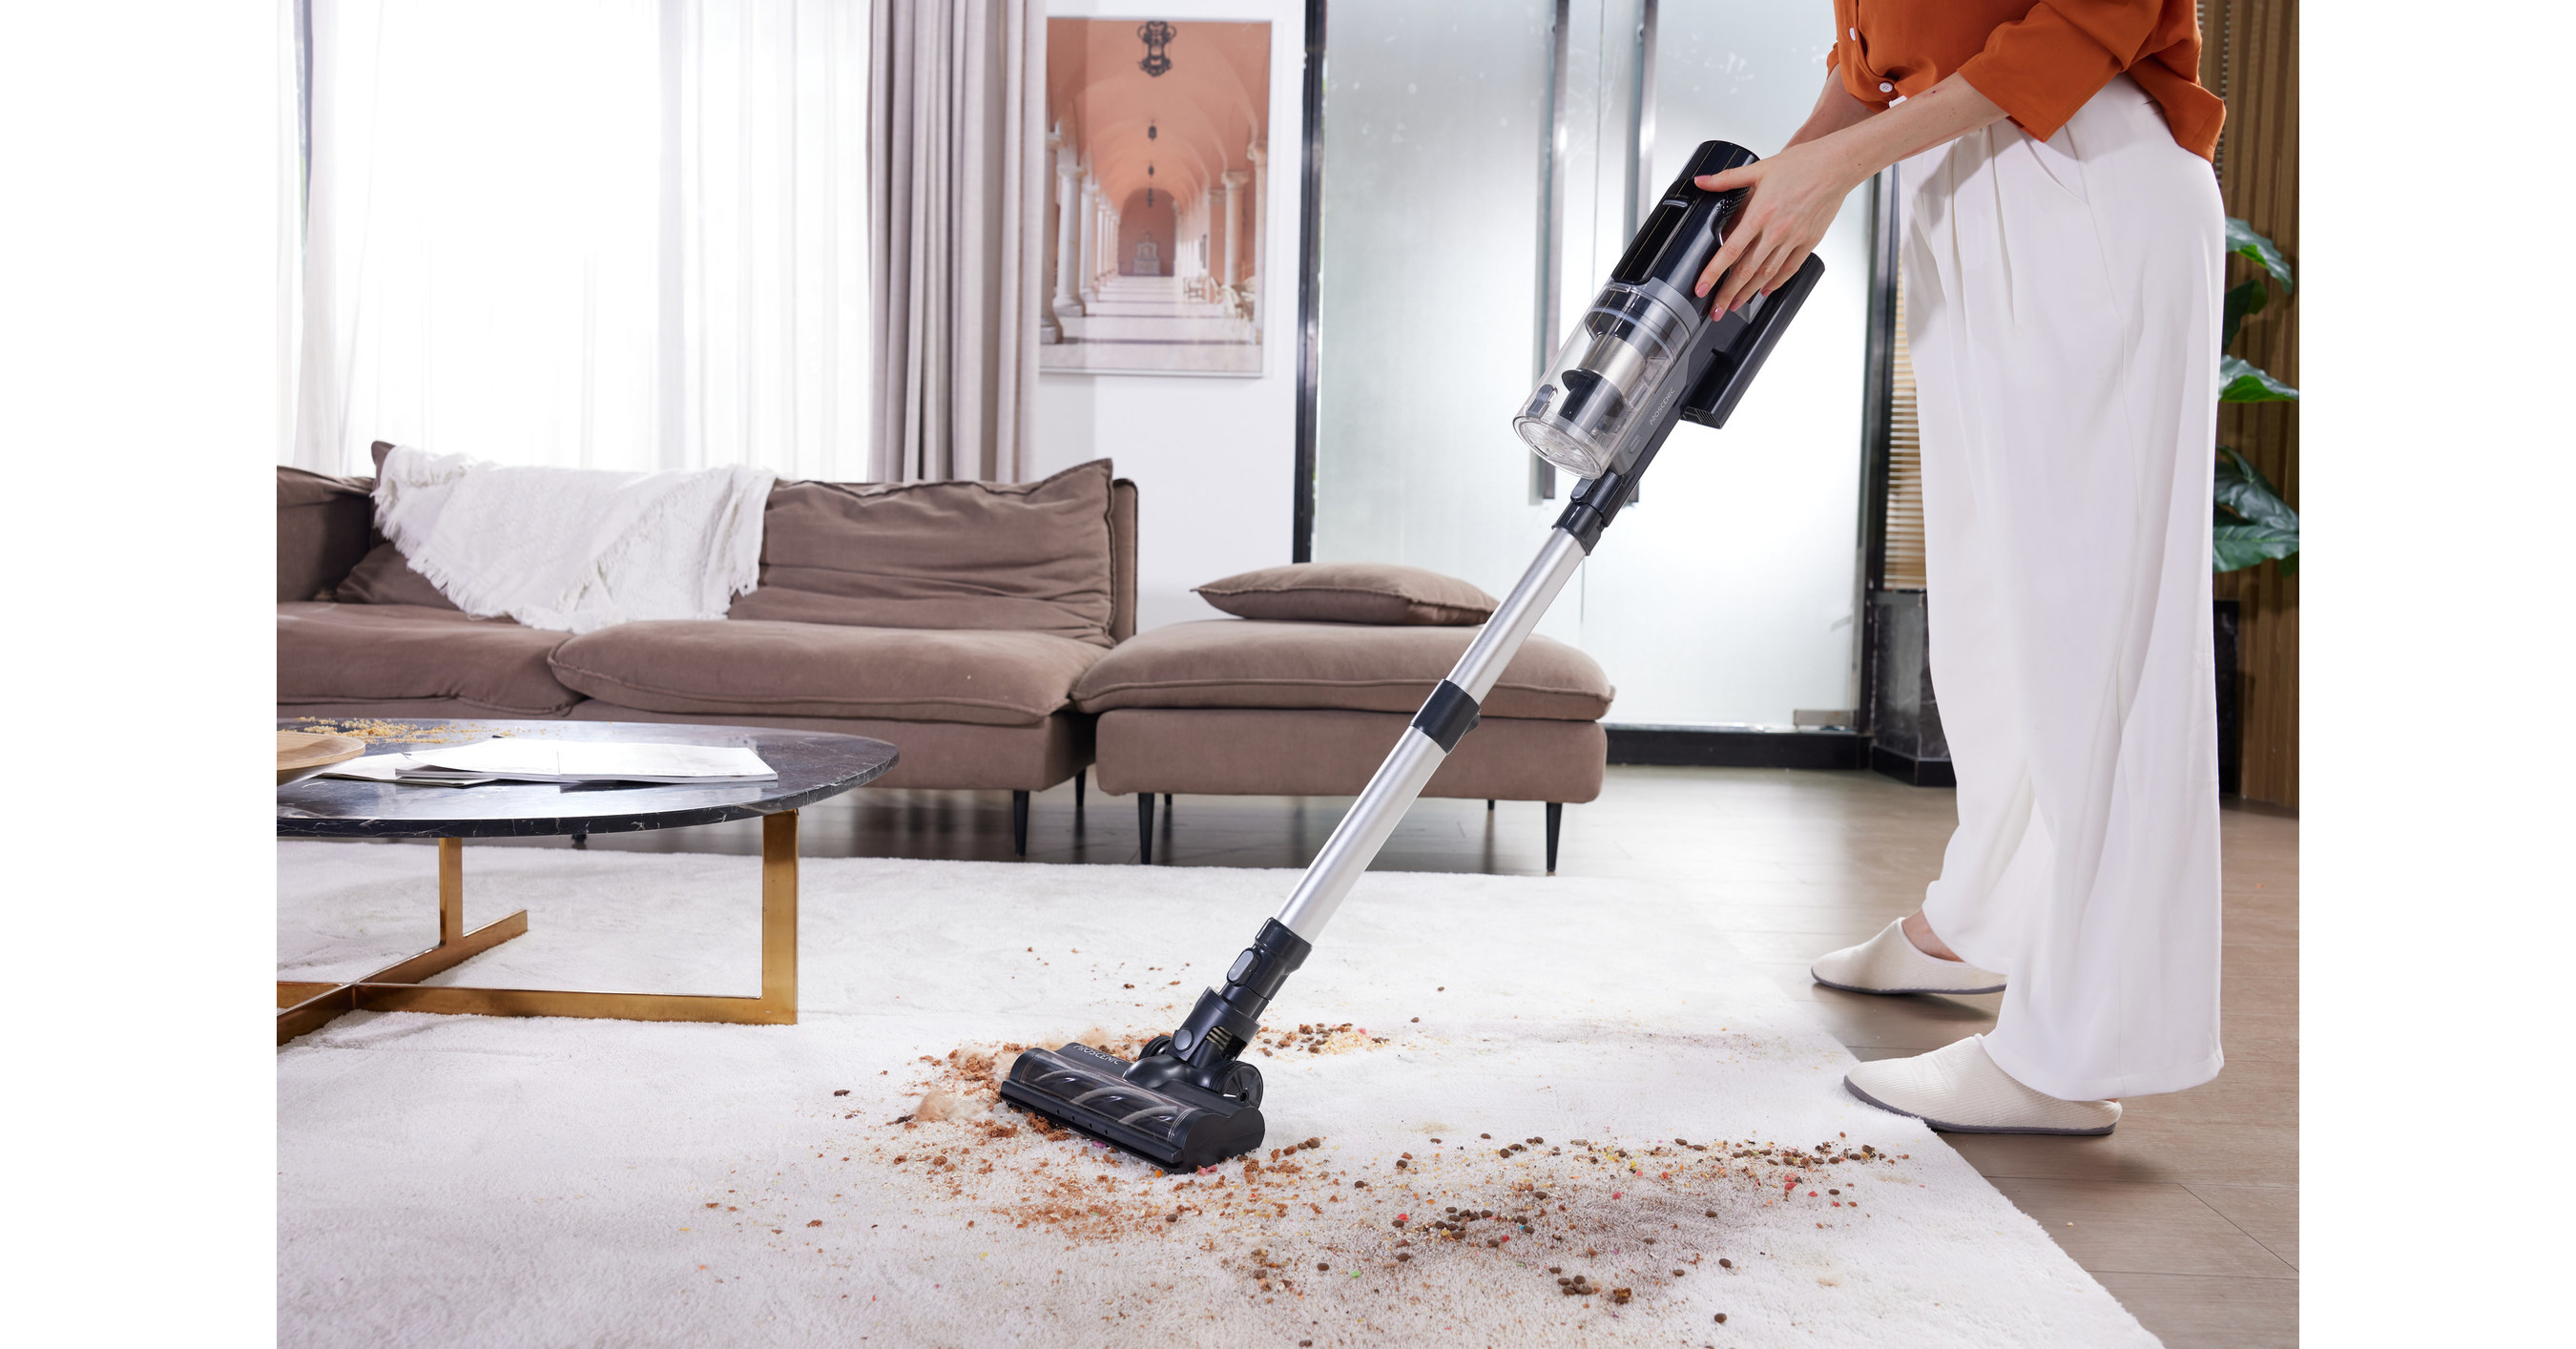 DustZero S3 Announced - Powerful All-in-One Smart Vacuum Designed to ...